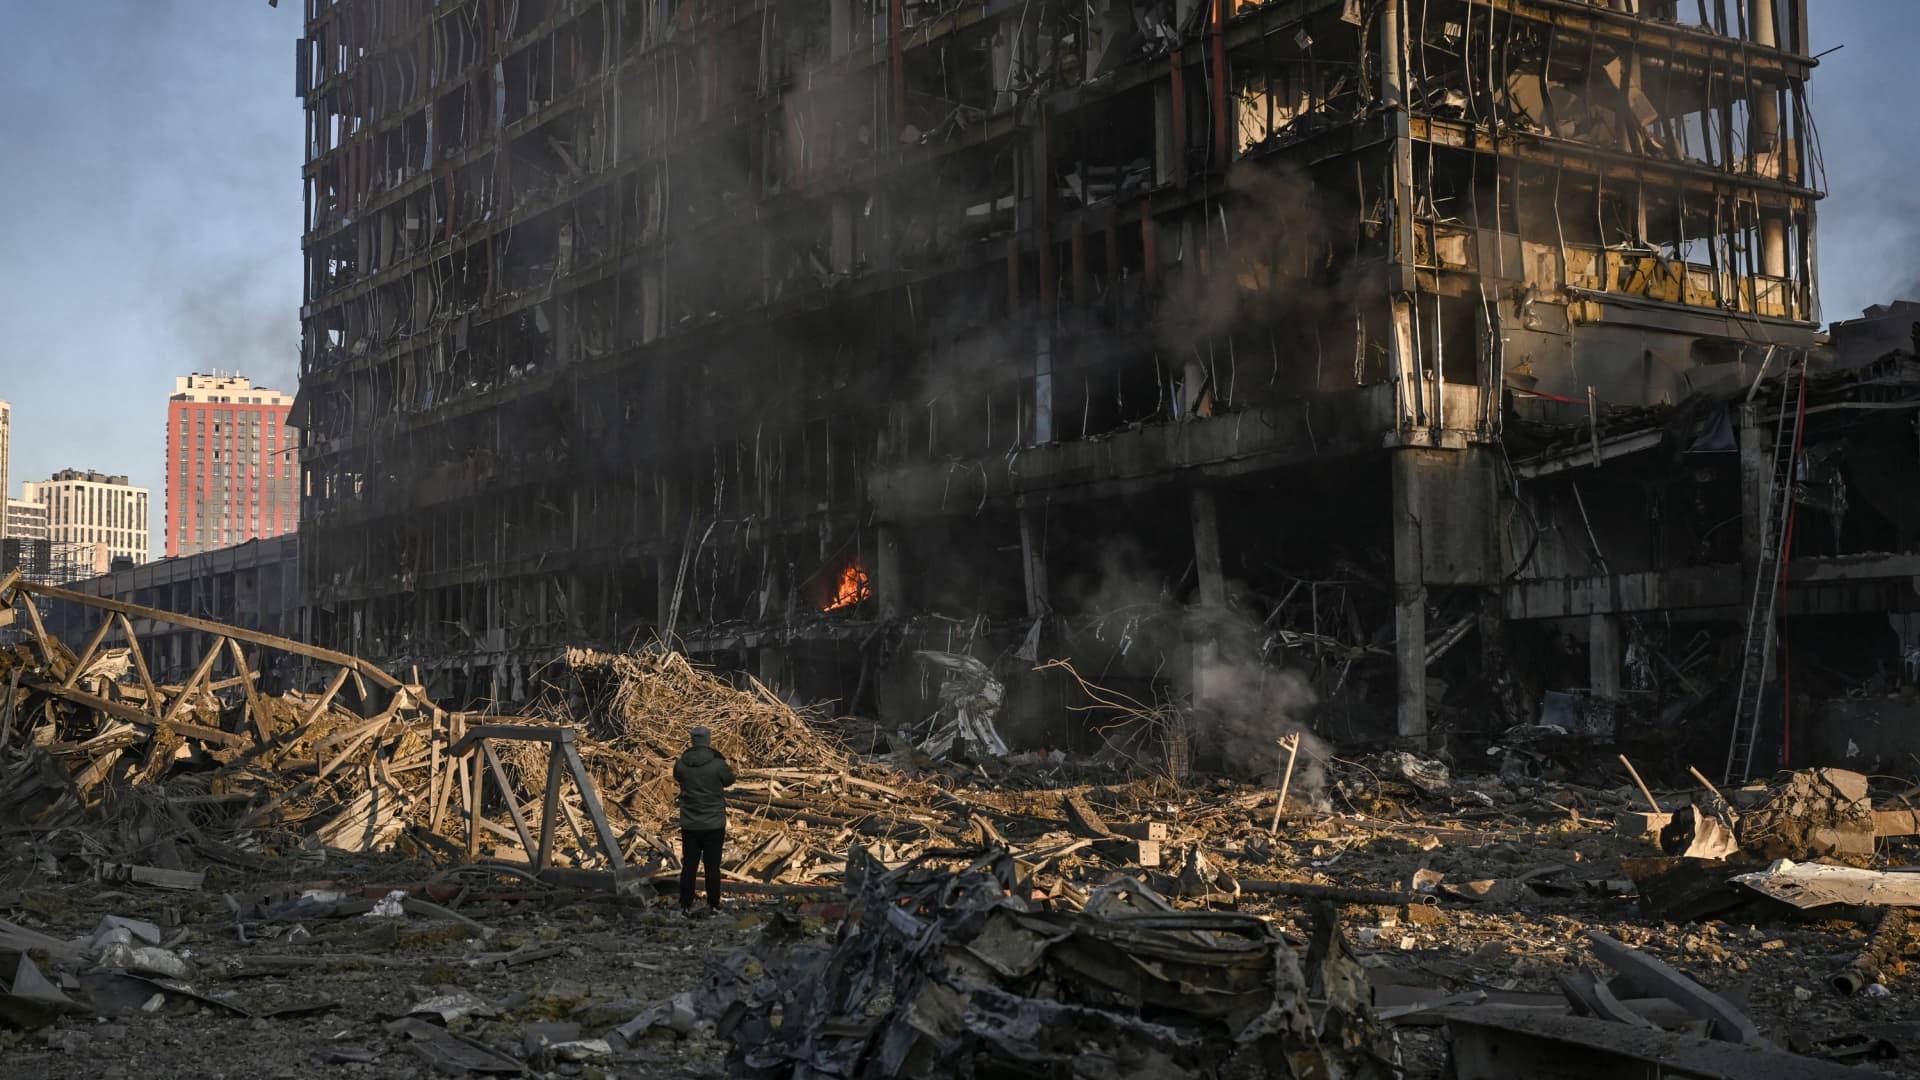 A man stand looking at the burning and destroyed Retroville shopping mall after a Russian attack on the northwest of the capital Kyiv on March 21, 2022.